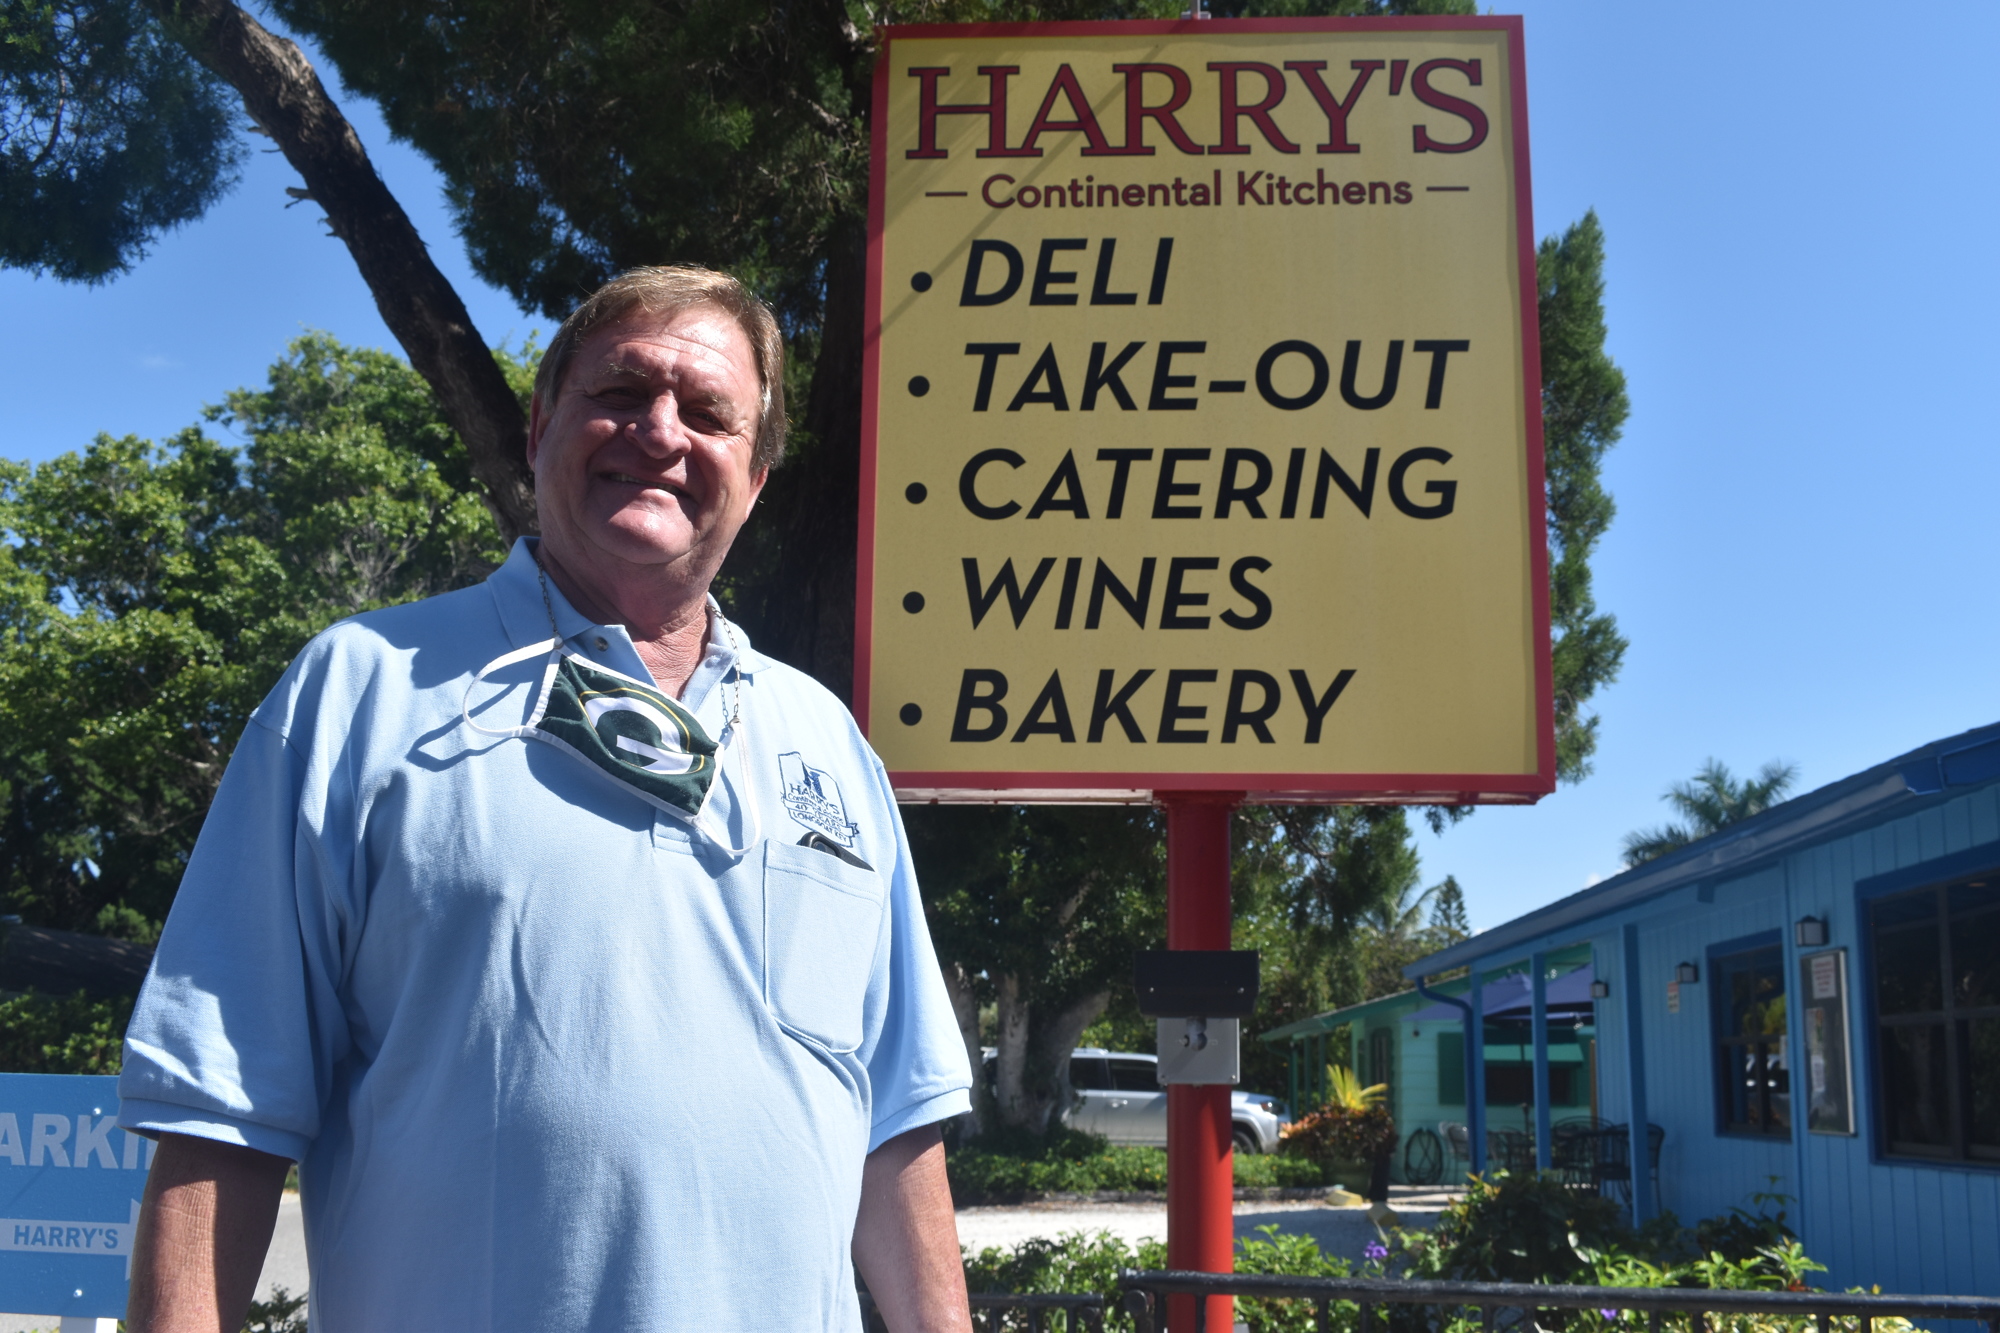 Harry Christensen of Harry’s Continental Kitchens thinks the St. Regis will help fill the void left by the different hotels and restaurants that have closed through the years in Longboat Key.